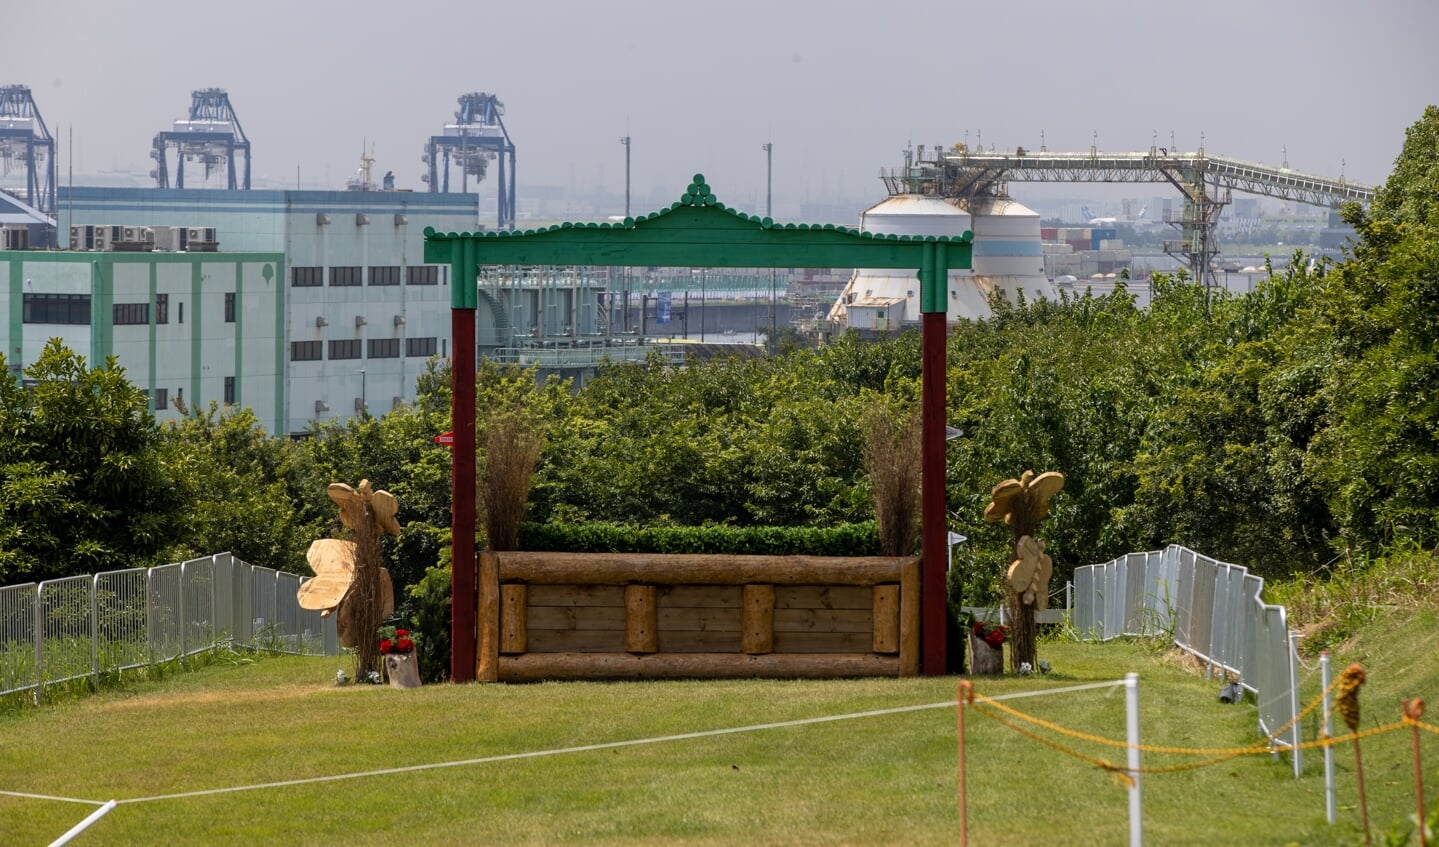 Fence 1
Olympic Games Tokyo 2021
© Hippo Foto - Dirk Caremans
28/07/2021